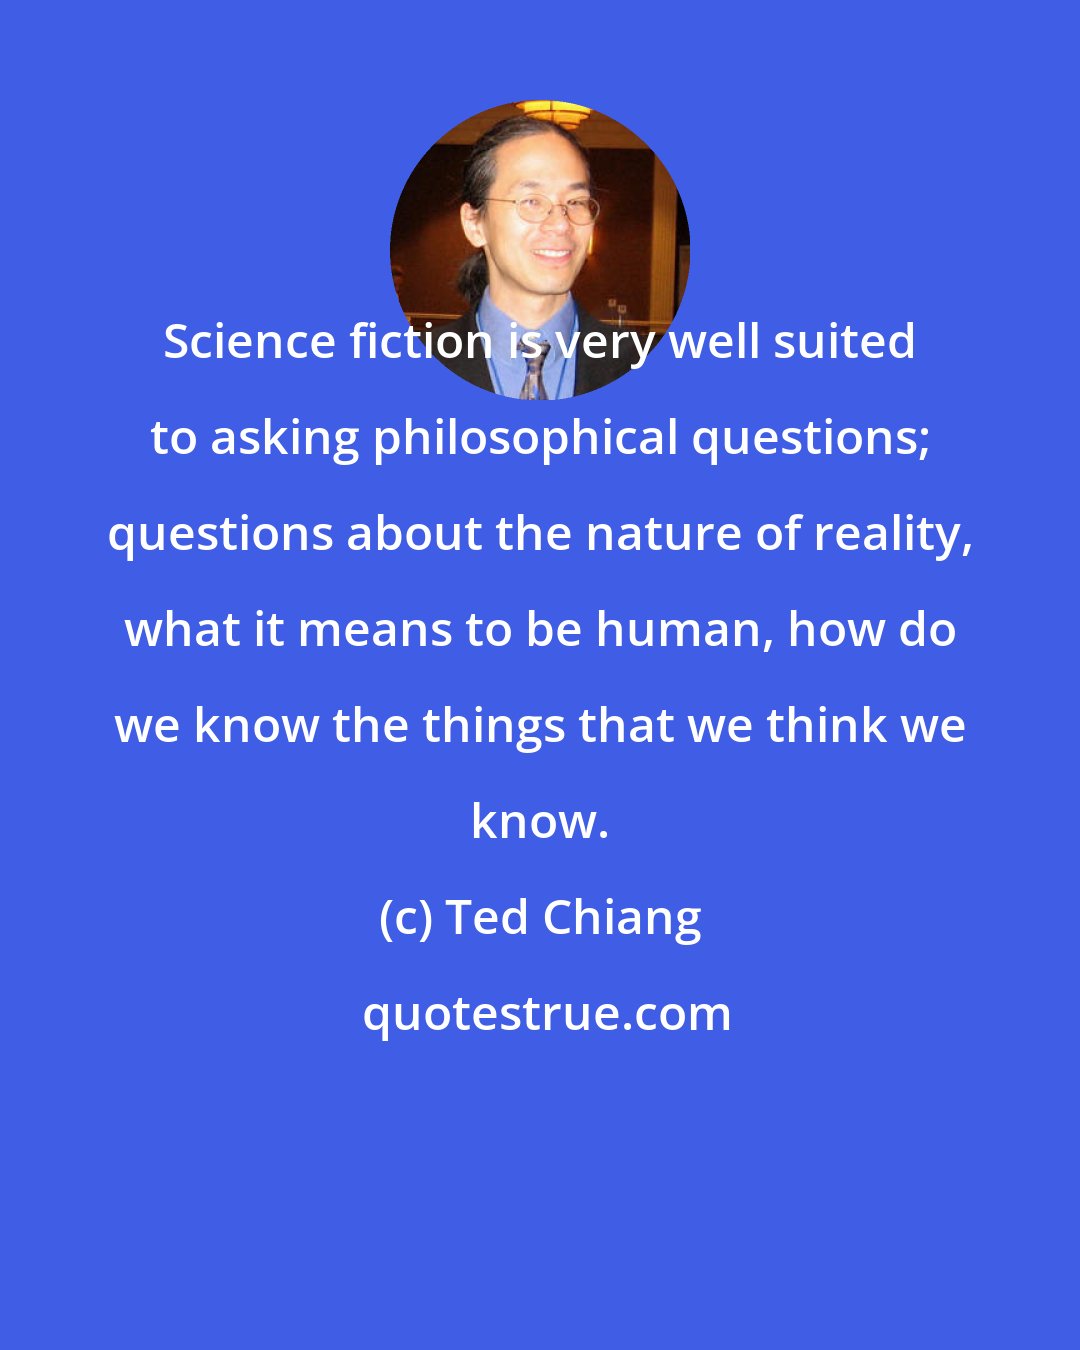 Ted Chiang: Science fiction is very well suited to asking philosophical questions; questions about the nature of reality, what it means to be human, how do we know the things that we think we know.